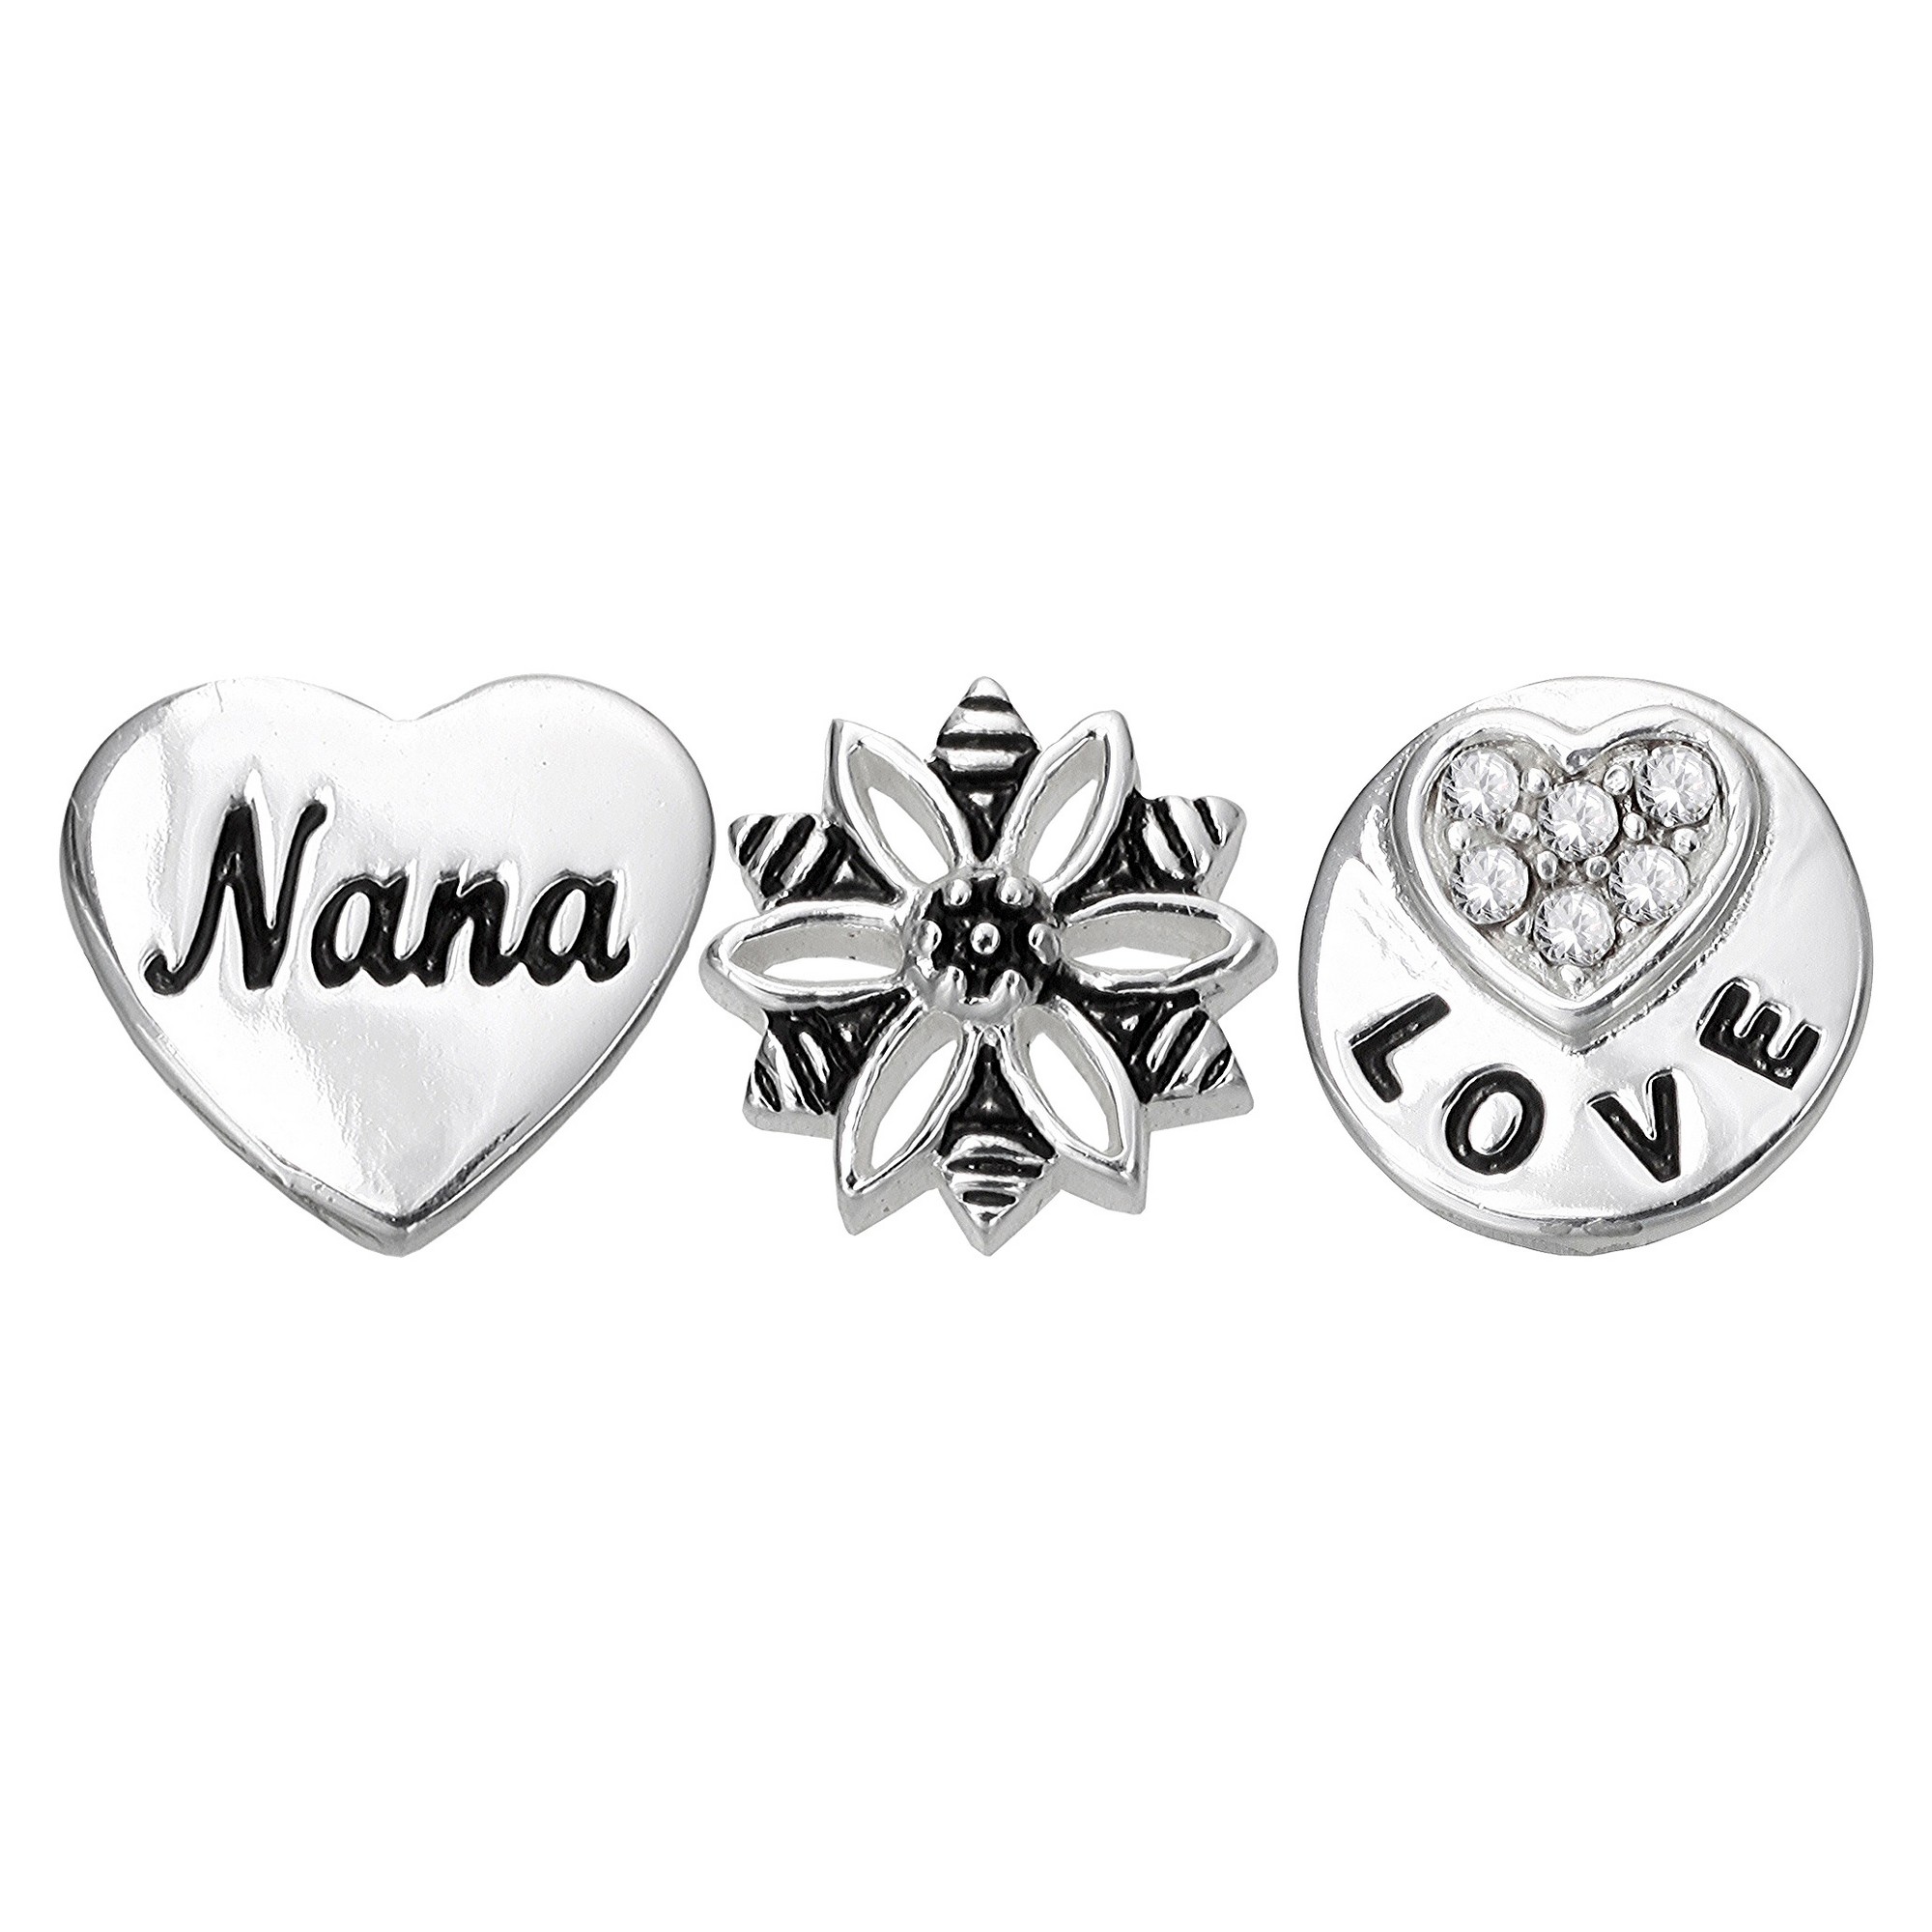 'Treasure Lockets 3 Silver Plated Charm Set with ''Nana Love You Always'' Theme - Silver, Women's'